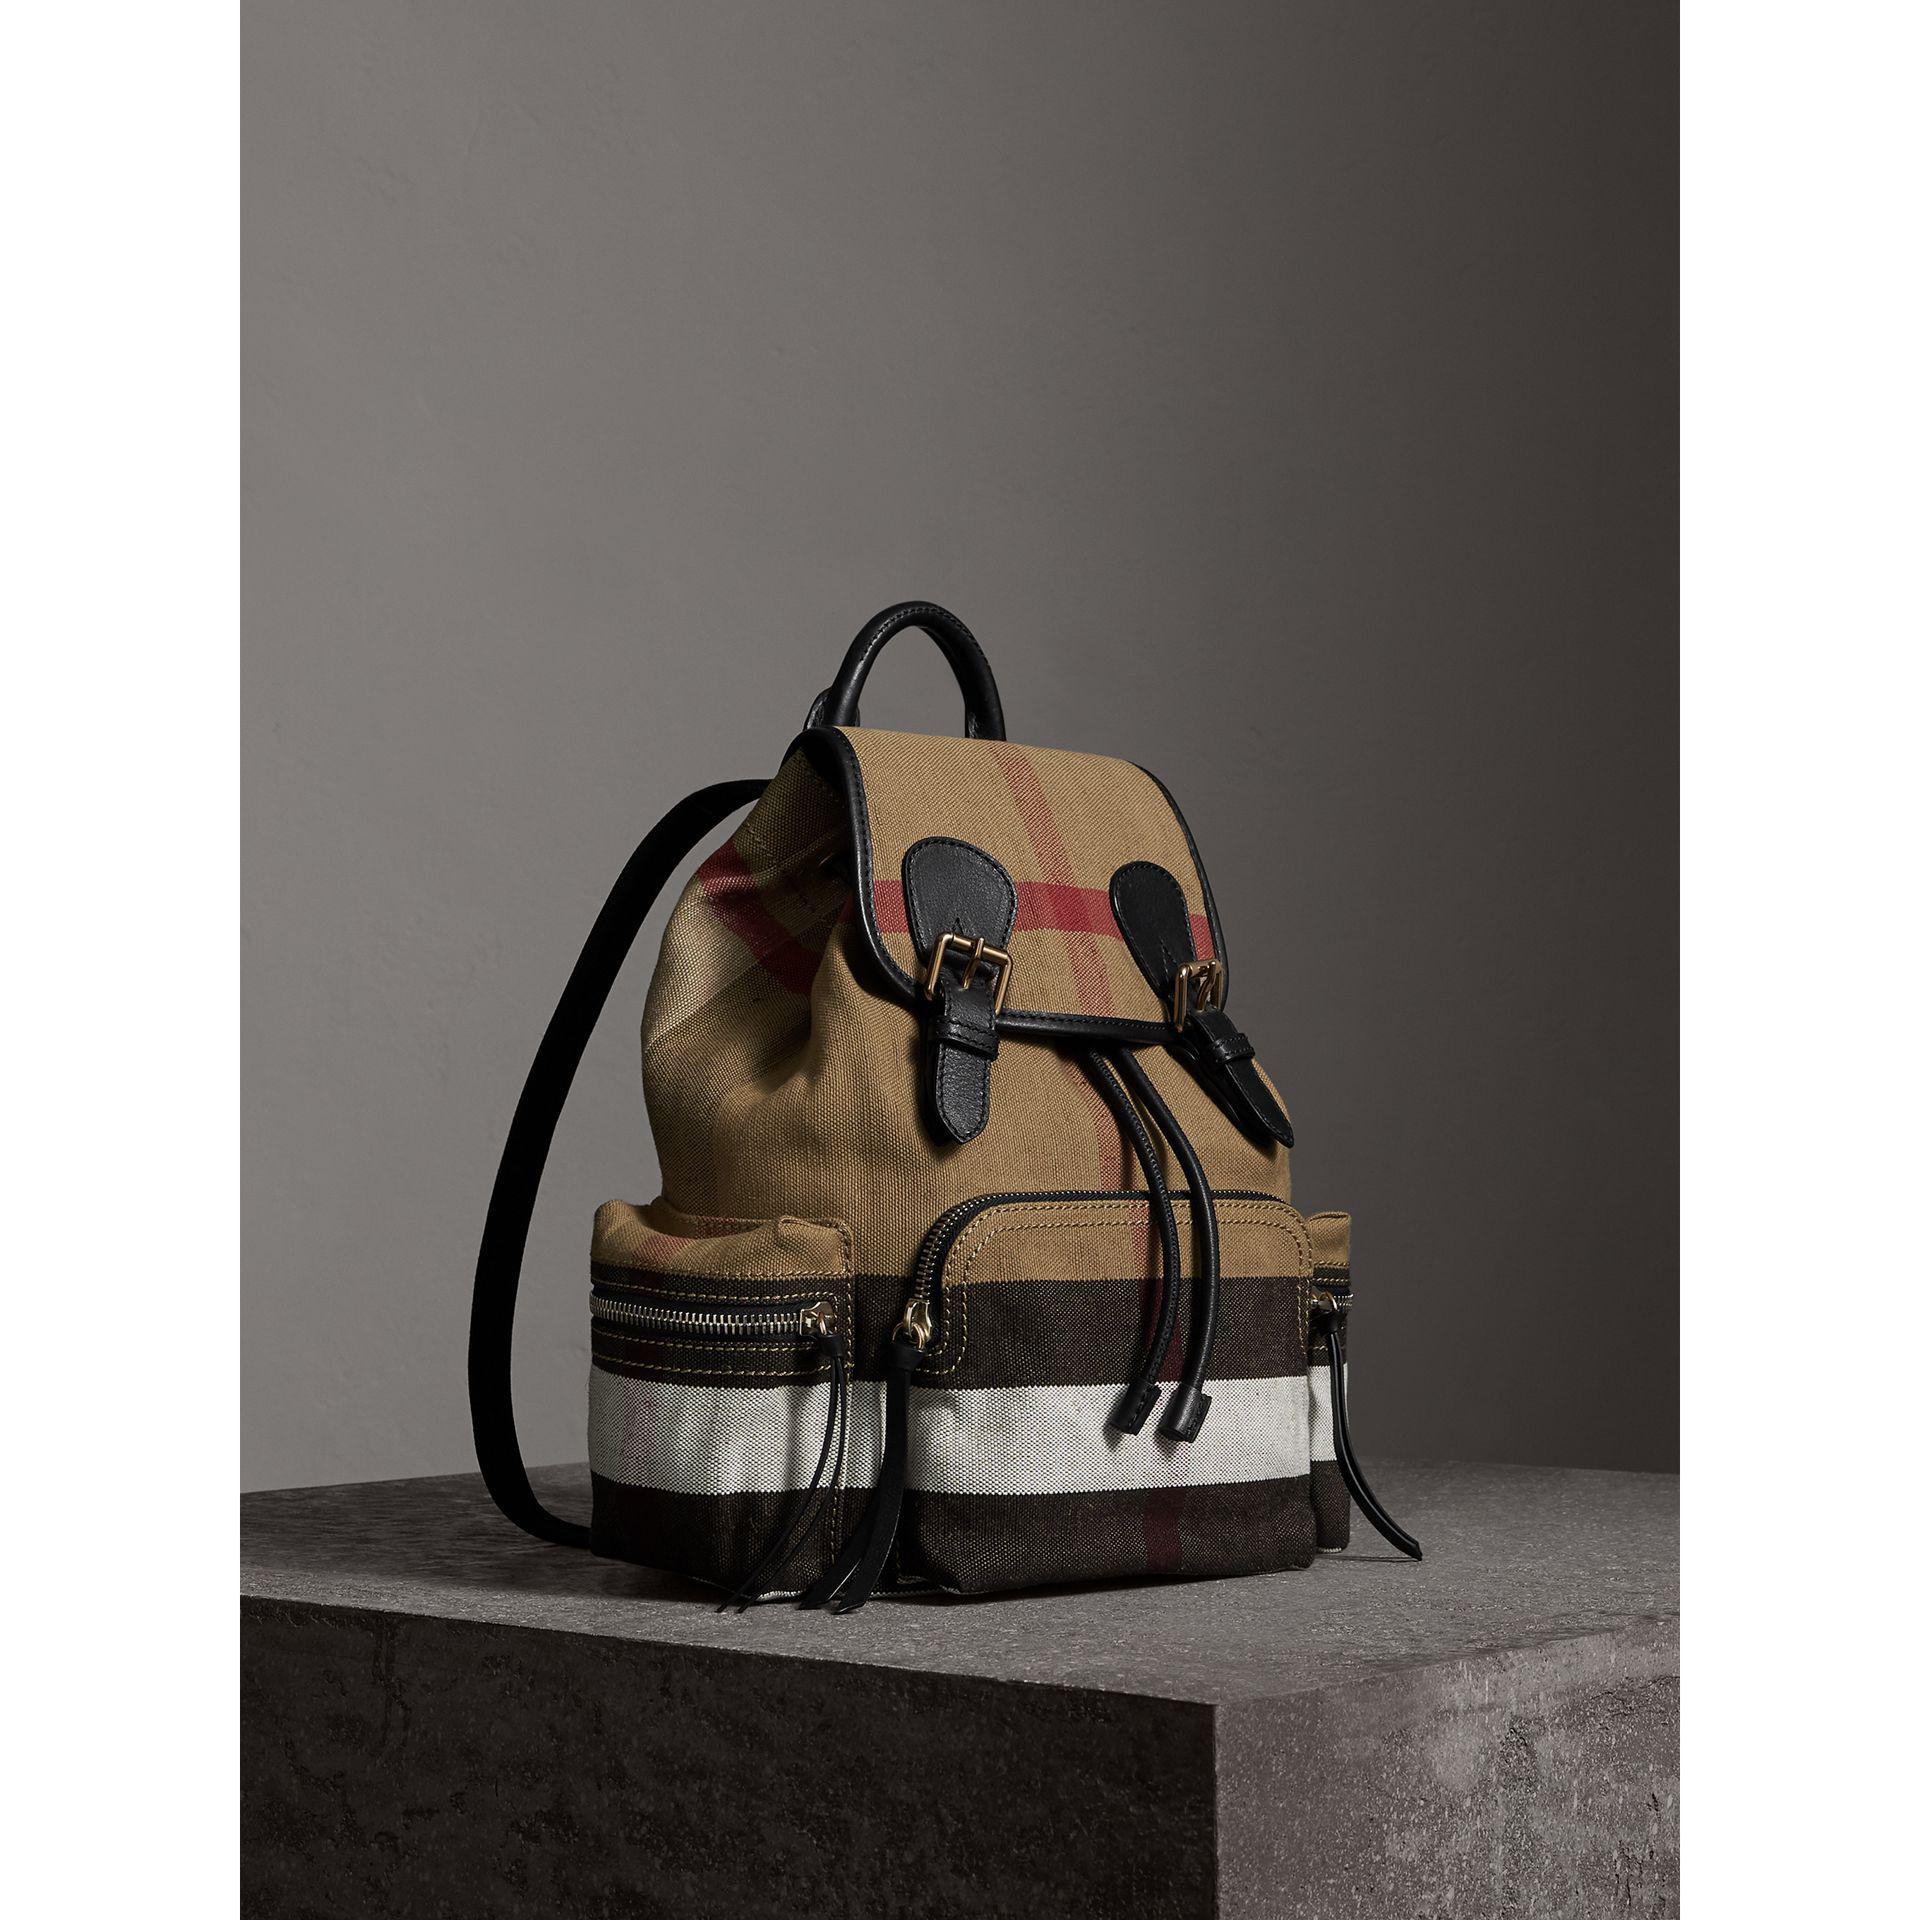 Burberry The Medium Rucksack In Canvas Check And Leather in Black | Lyst